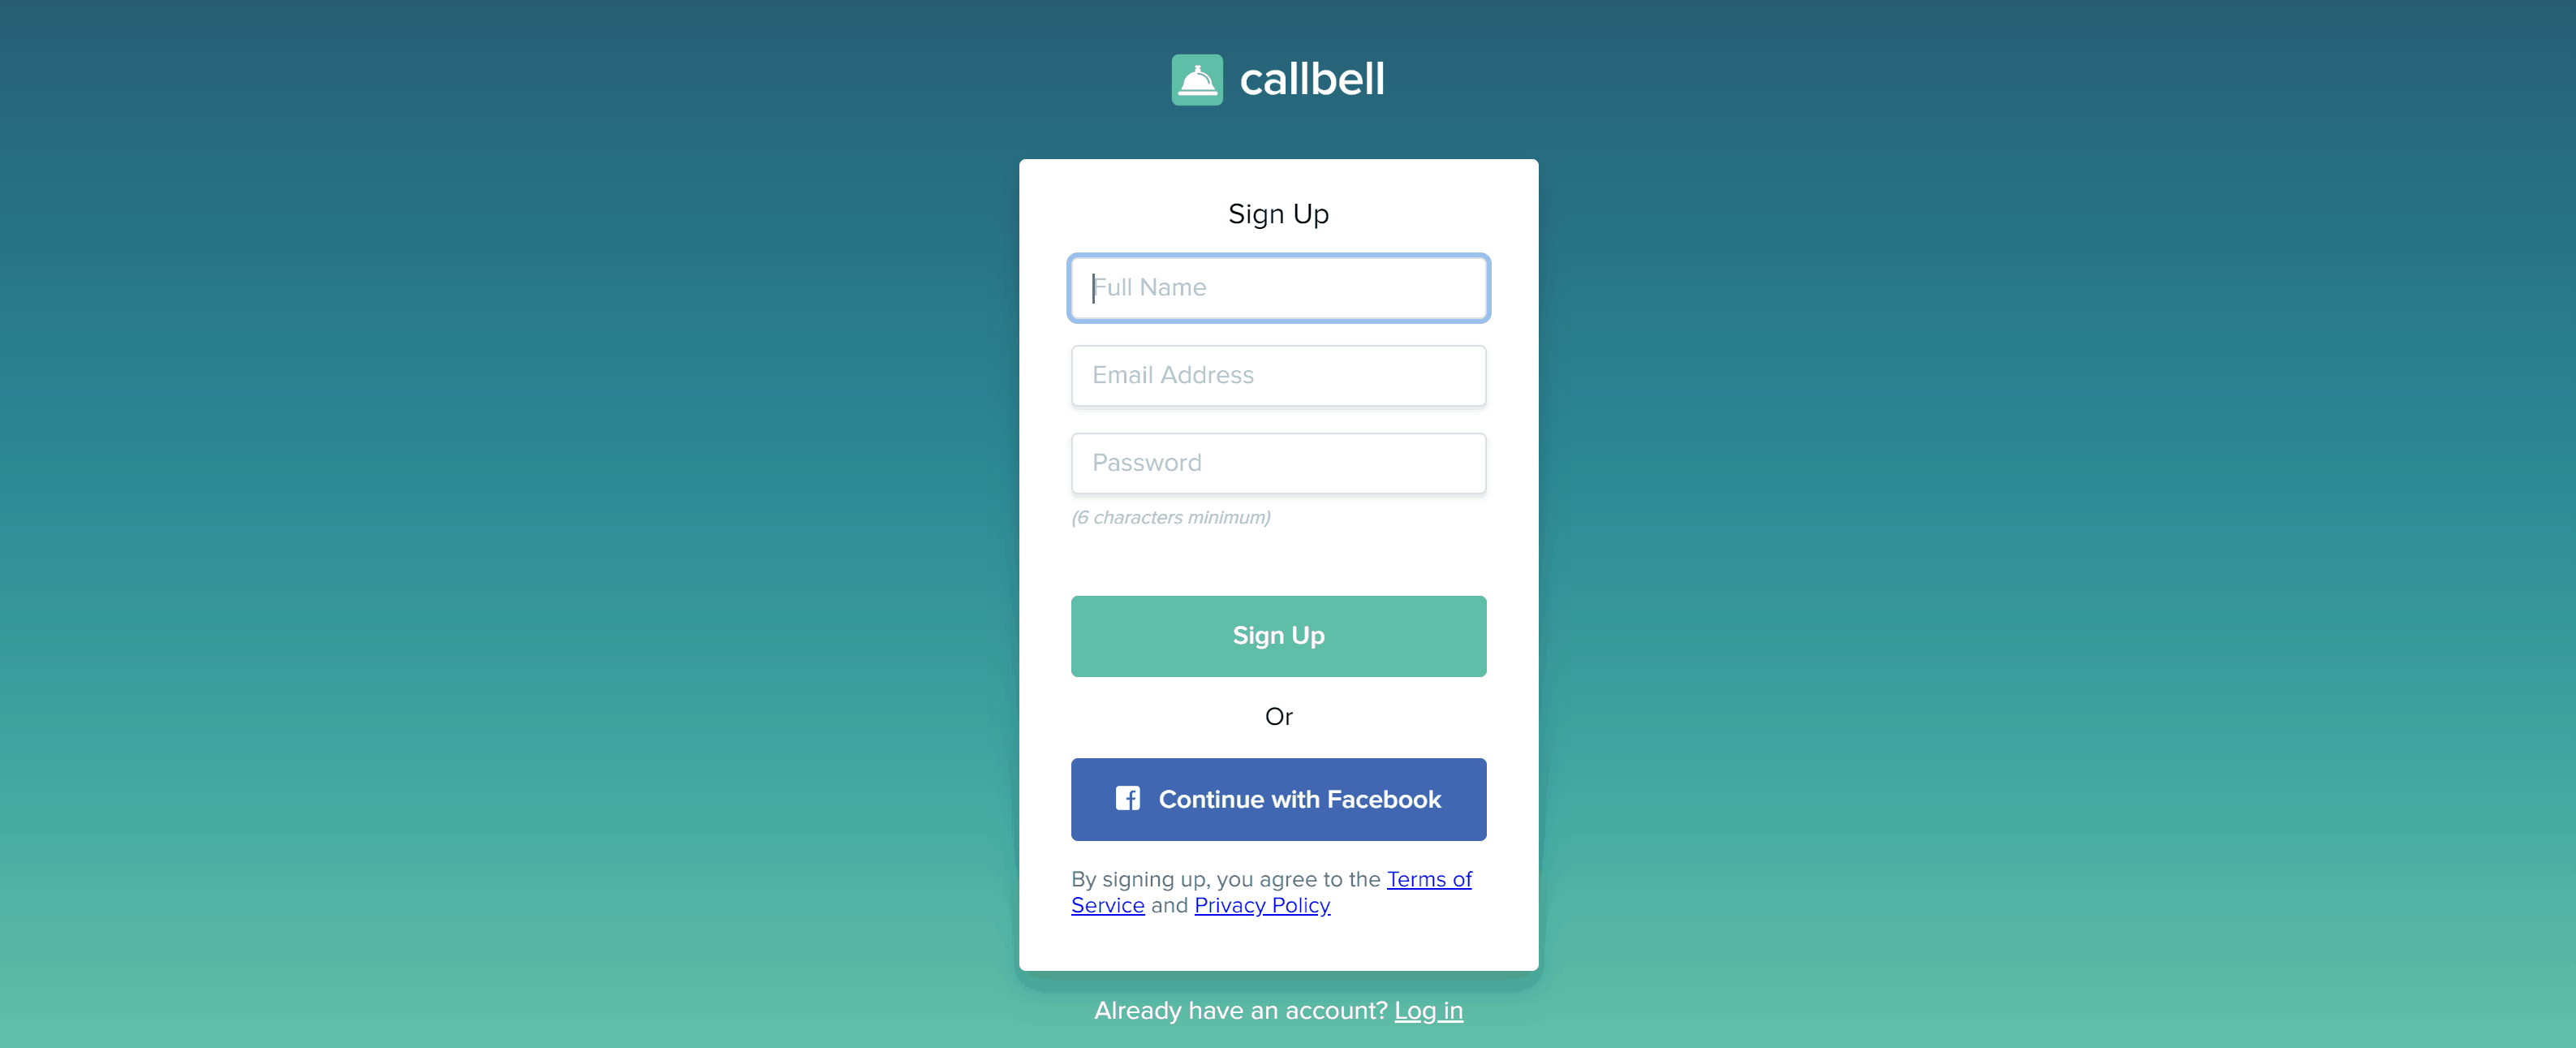 How to create an account on Callbell